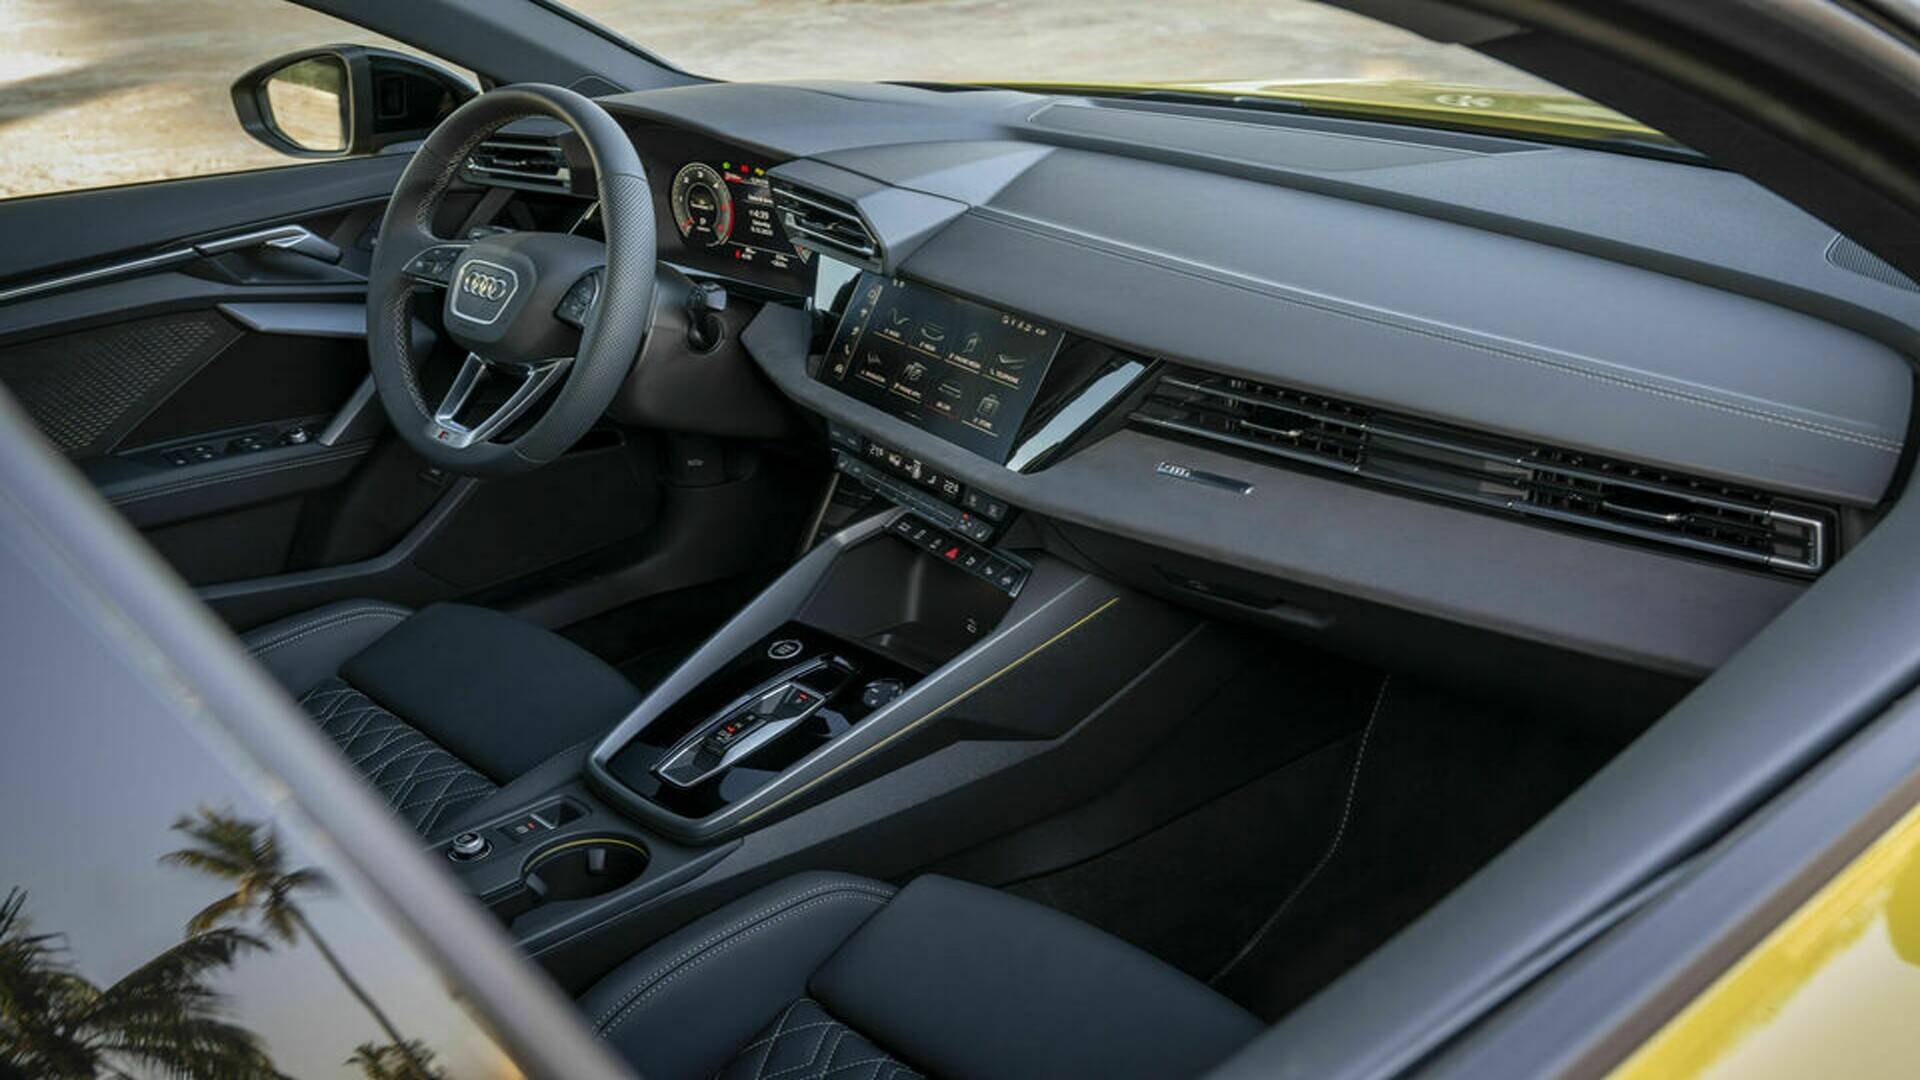 The Steering And Dashboard Of The Audi A3 Allstreet